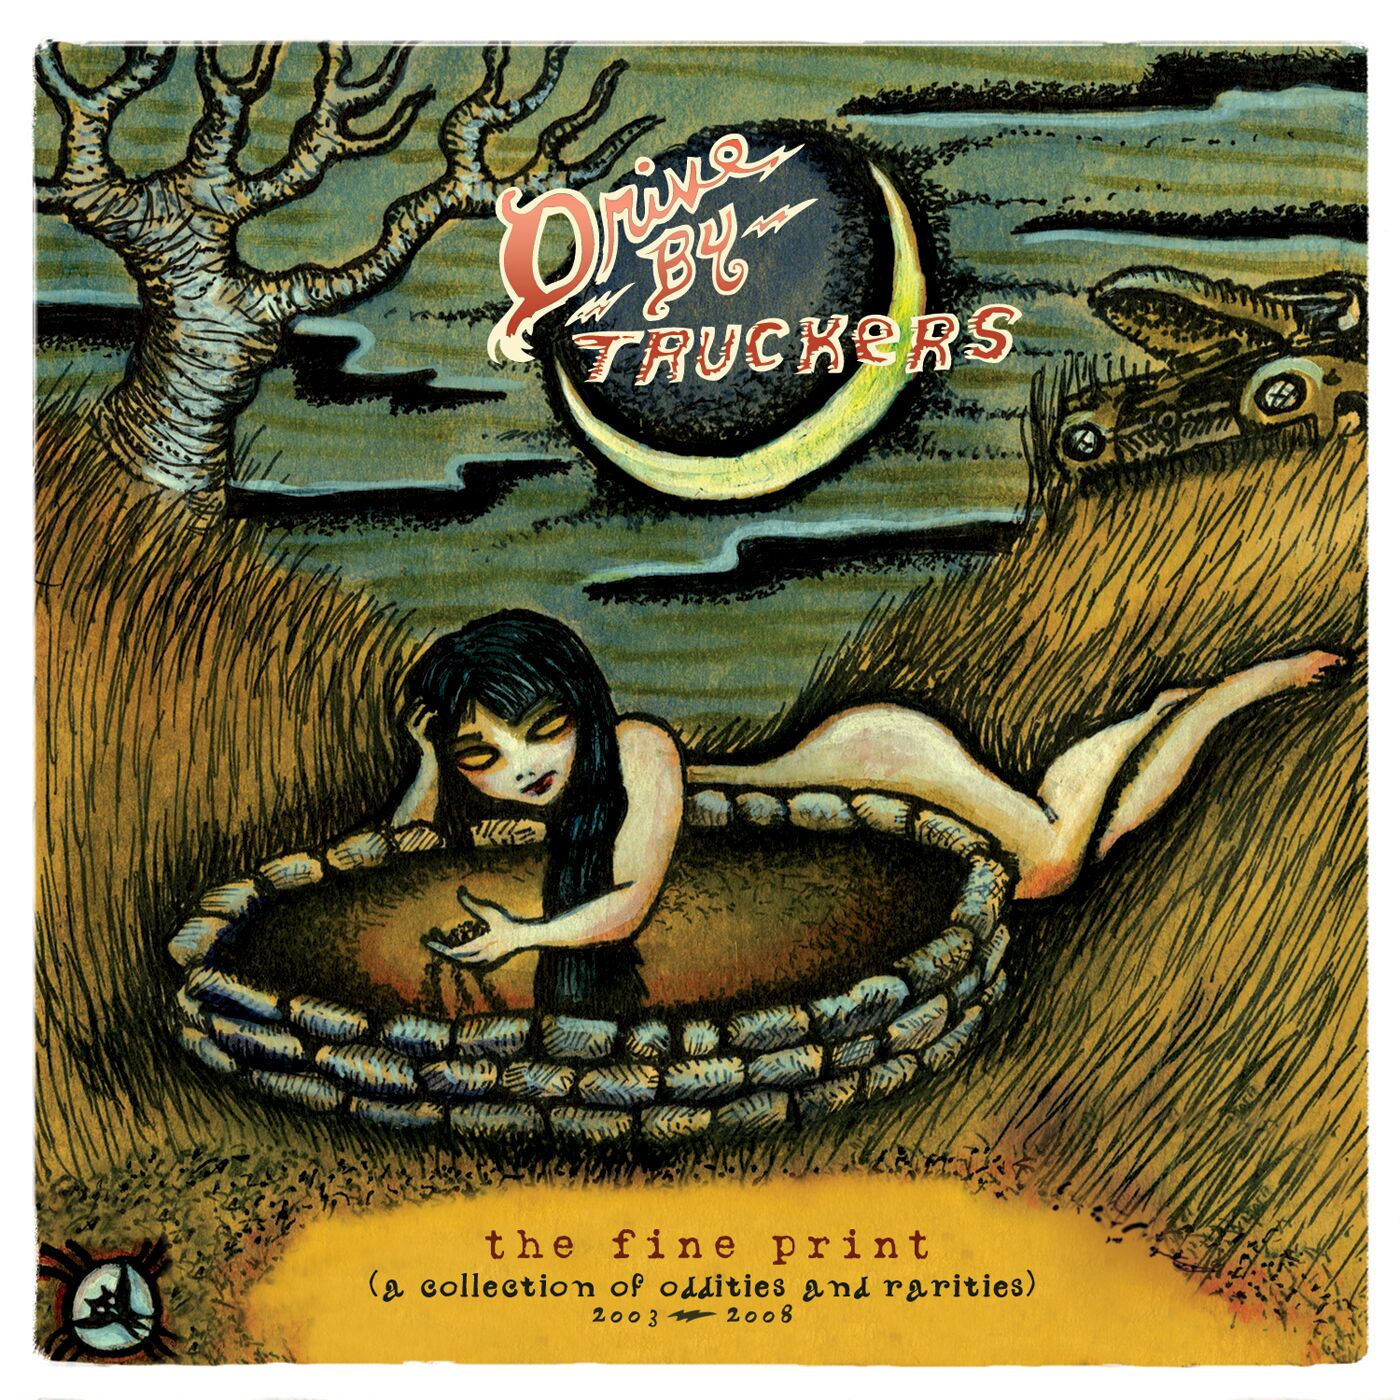 Drive-By Truckers - The Fine Print (A Collection Of Oddities And Rarities 2003-2008) [CD]